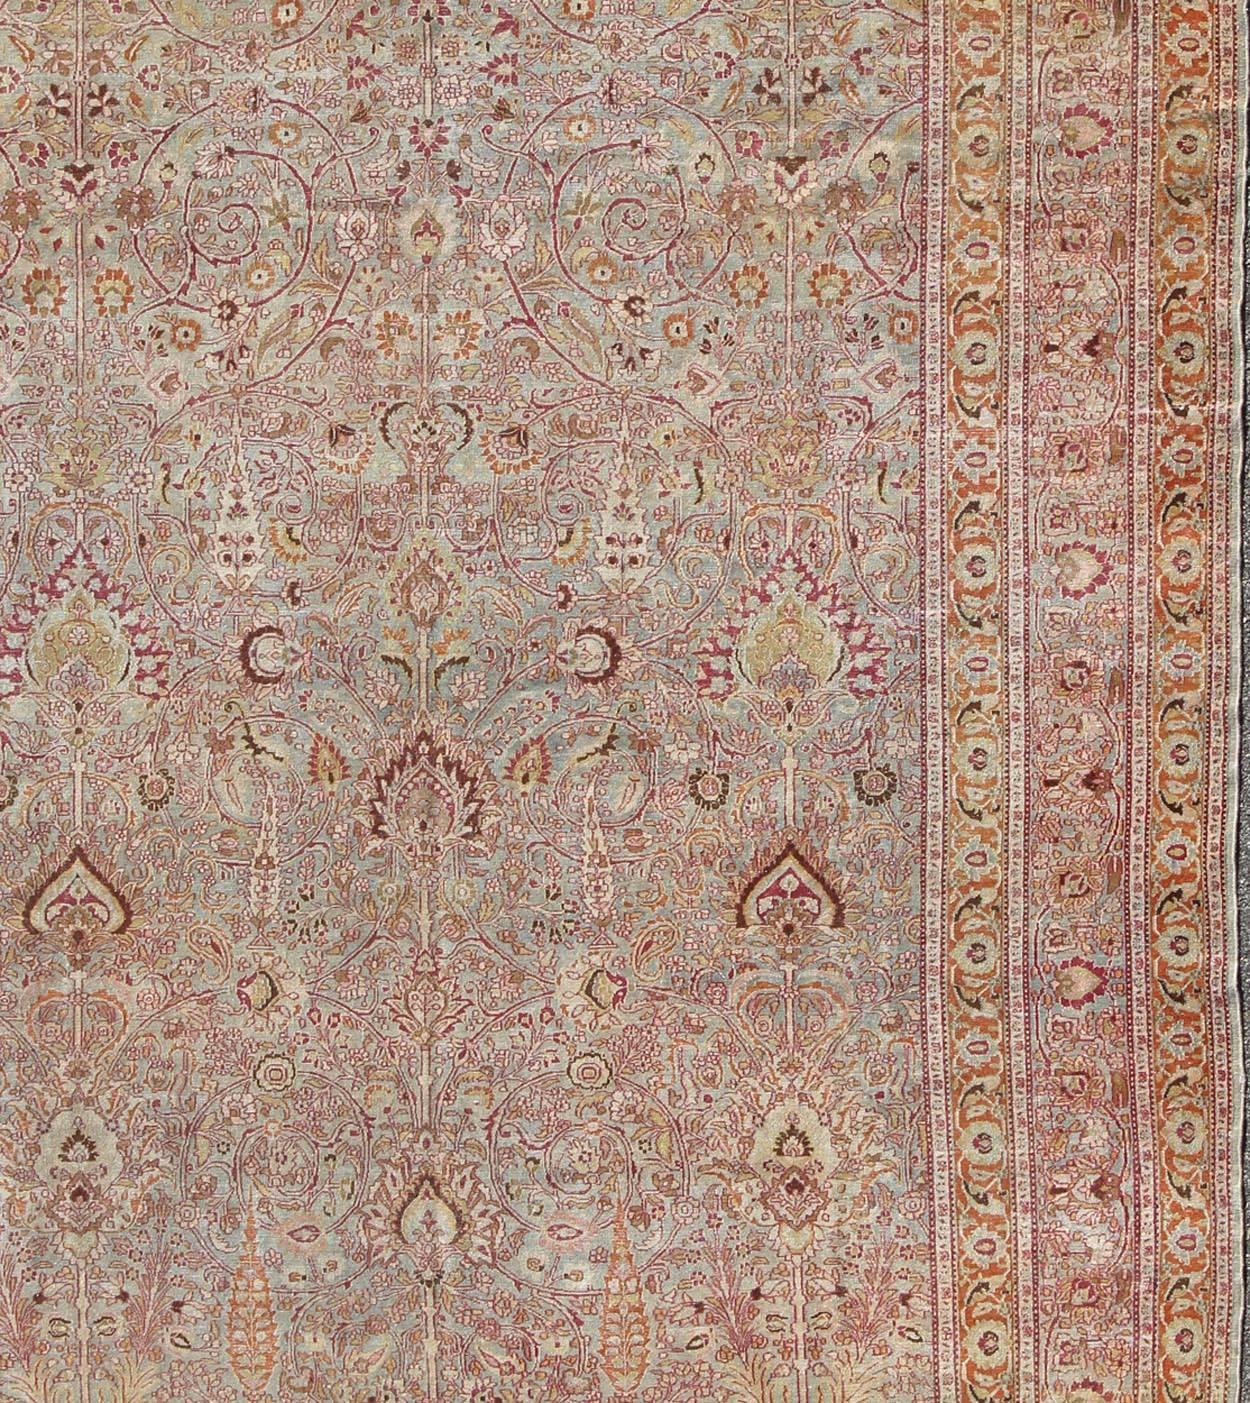 Antique Persian Khorassan Rug with All-Over Floral Design in Orange, Red, Pink In Good Condition For Sale In Atlanta, GA